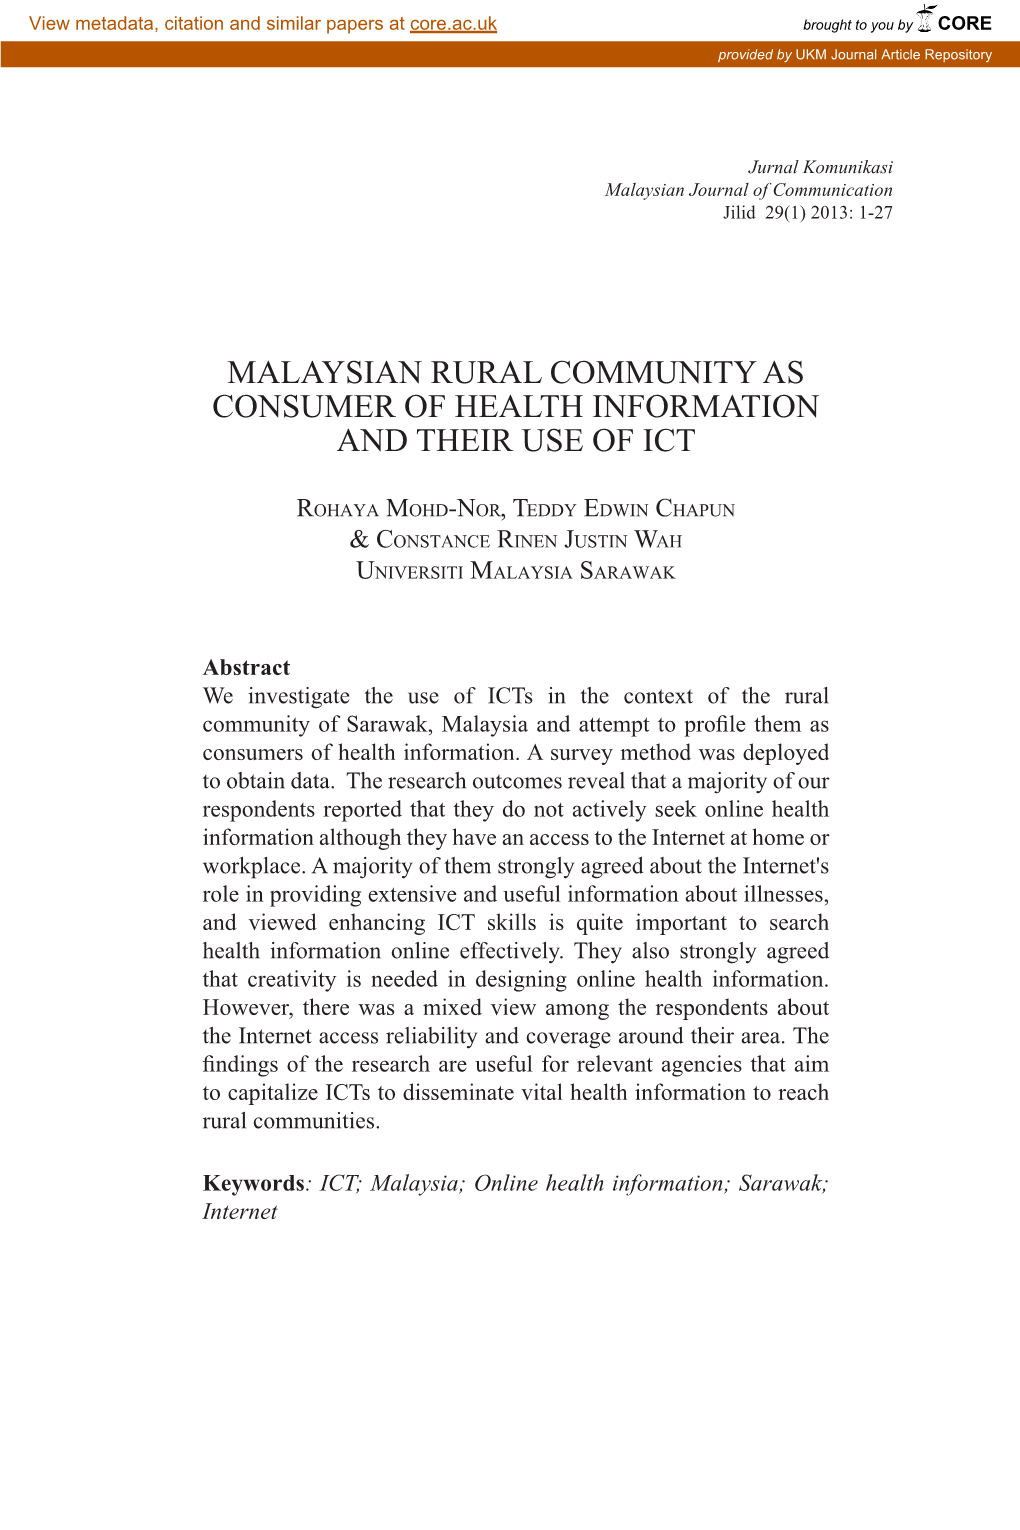 Malaysian Rural Community As Consumer of Health Information and Their Use of Ict